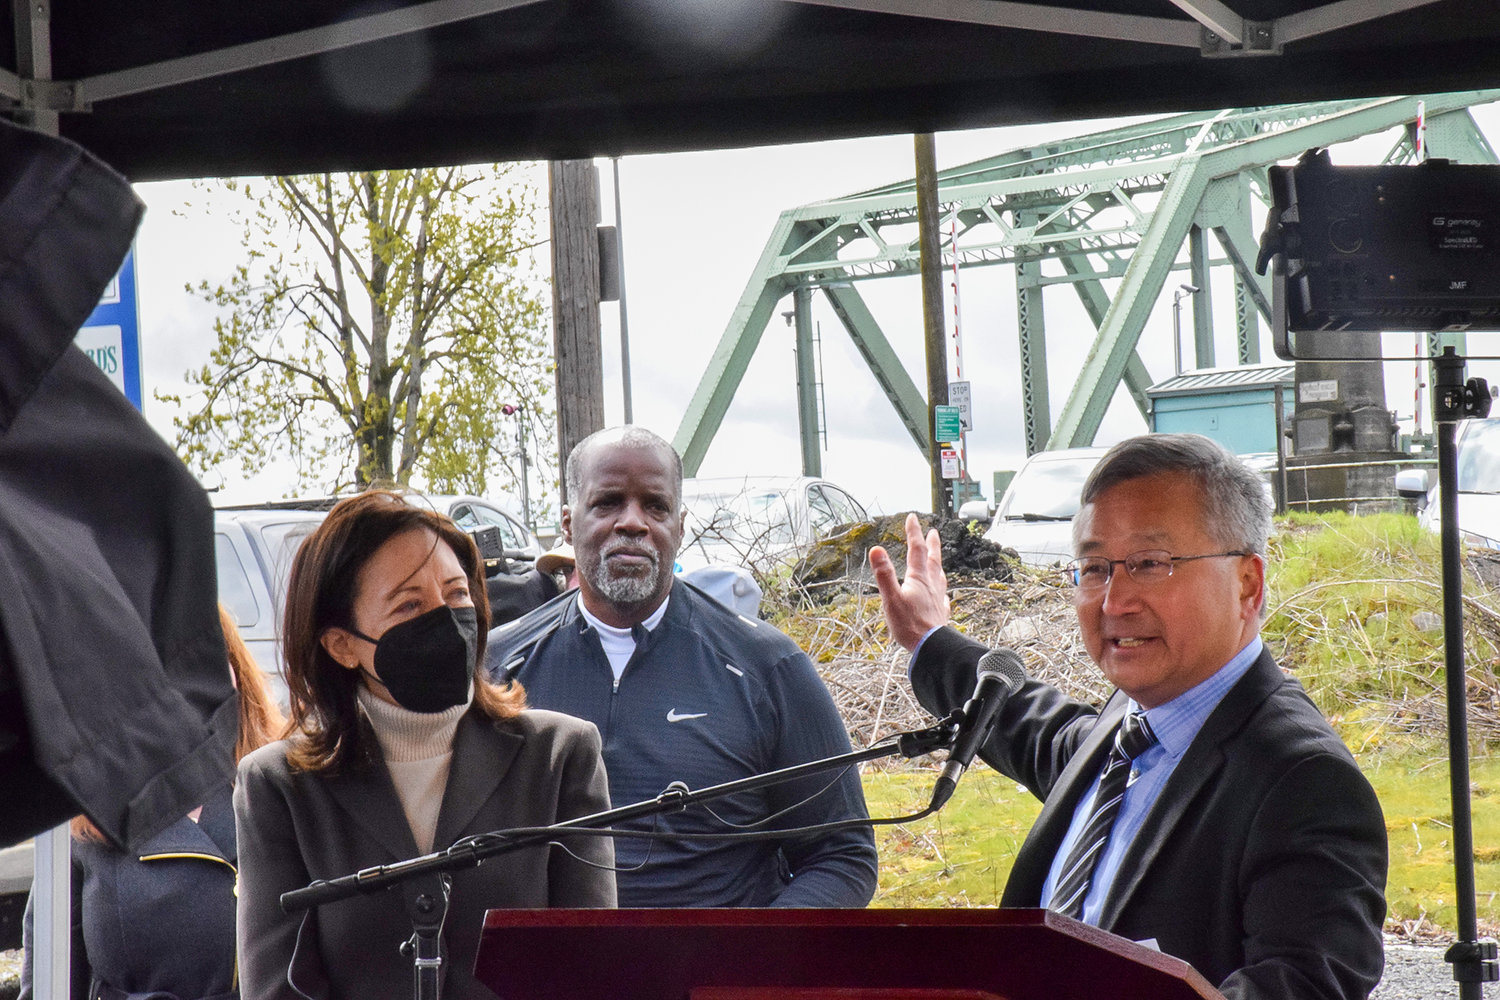 Interstate Bridge Replacement Project Community Advisory Group Member Sam Kim, right, talks about the challenges of a three-hour daily commute as bridge project administrator Greg Johnson and U.S. Sen. Maria Cantwell look on during a press event at the Interstate 5 bridge April 13.